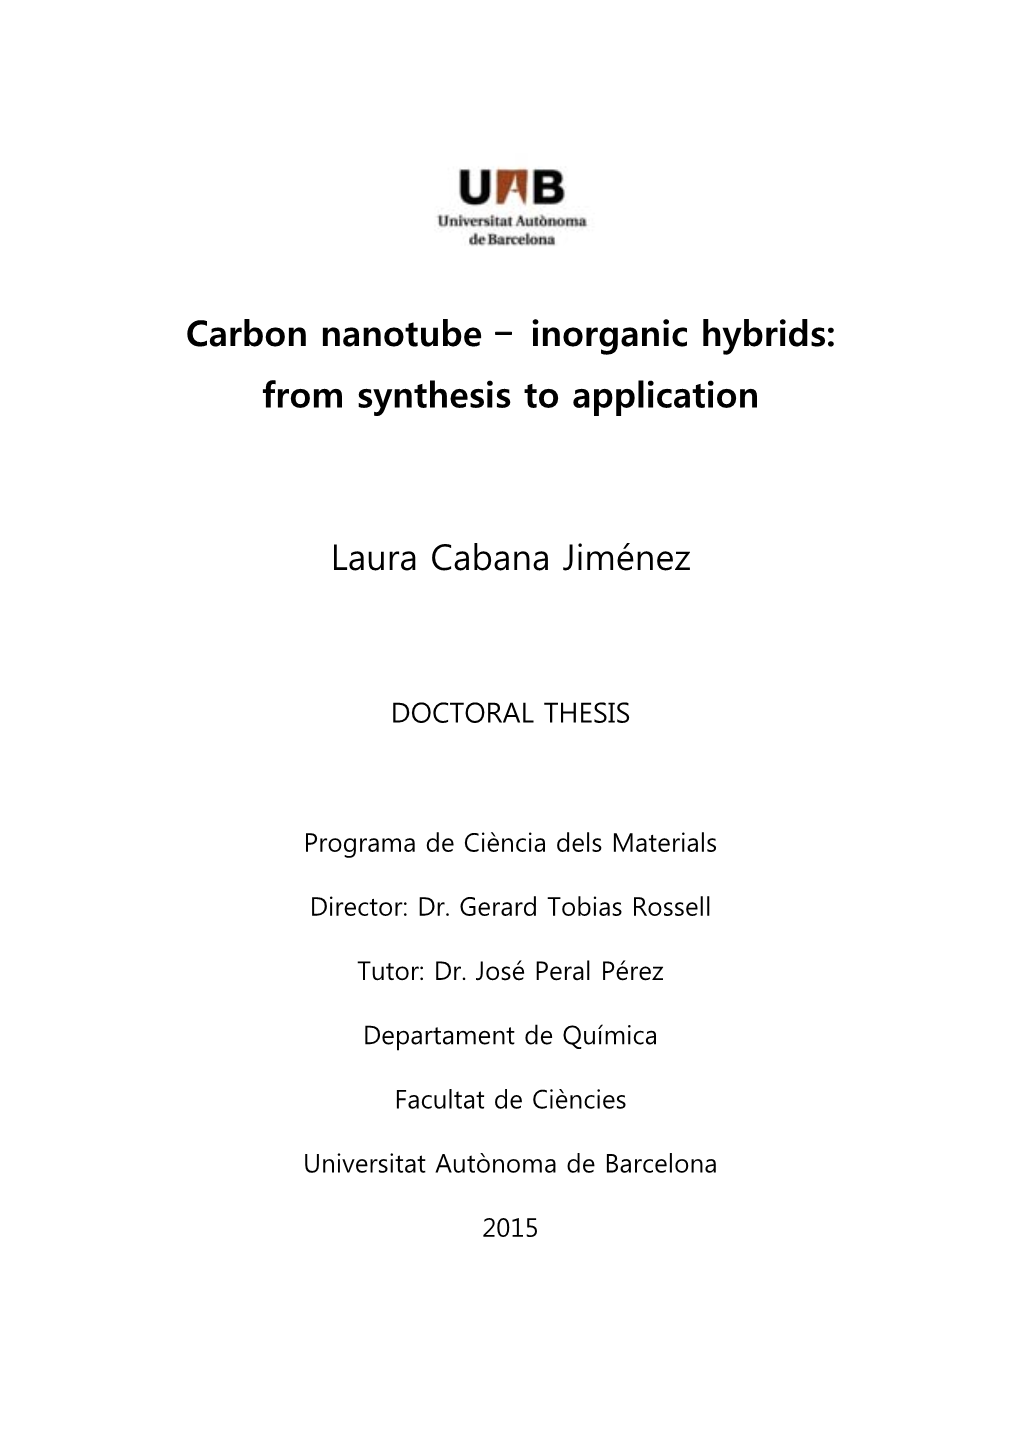 Carbon Nanotube ‒ Inorganic Hybrids: from Synthesis to Application